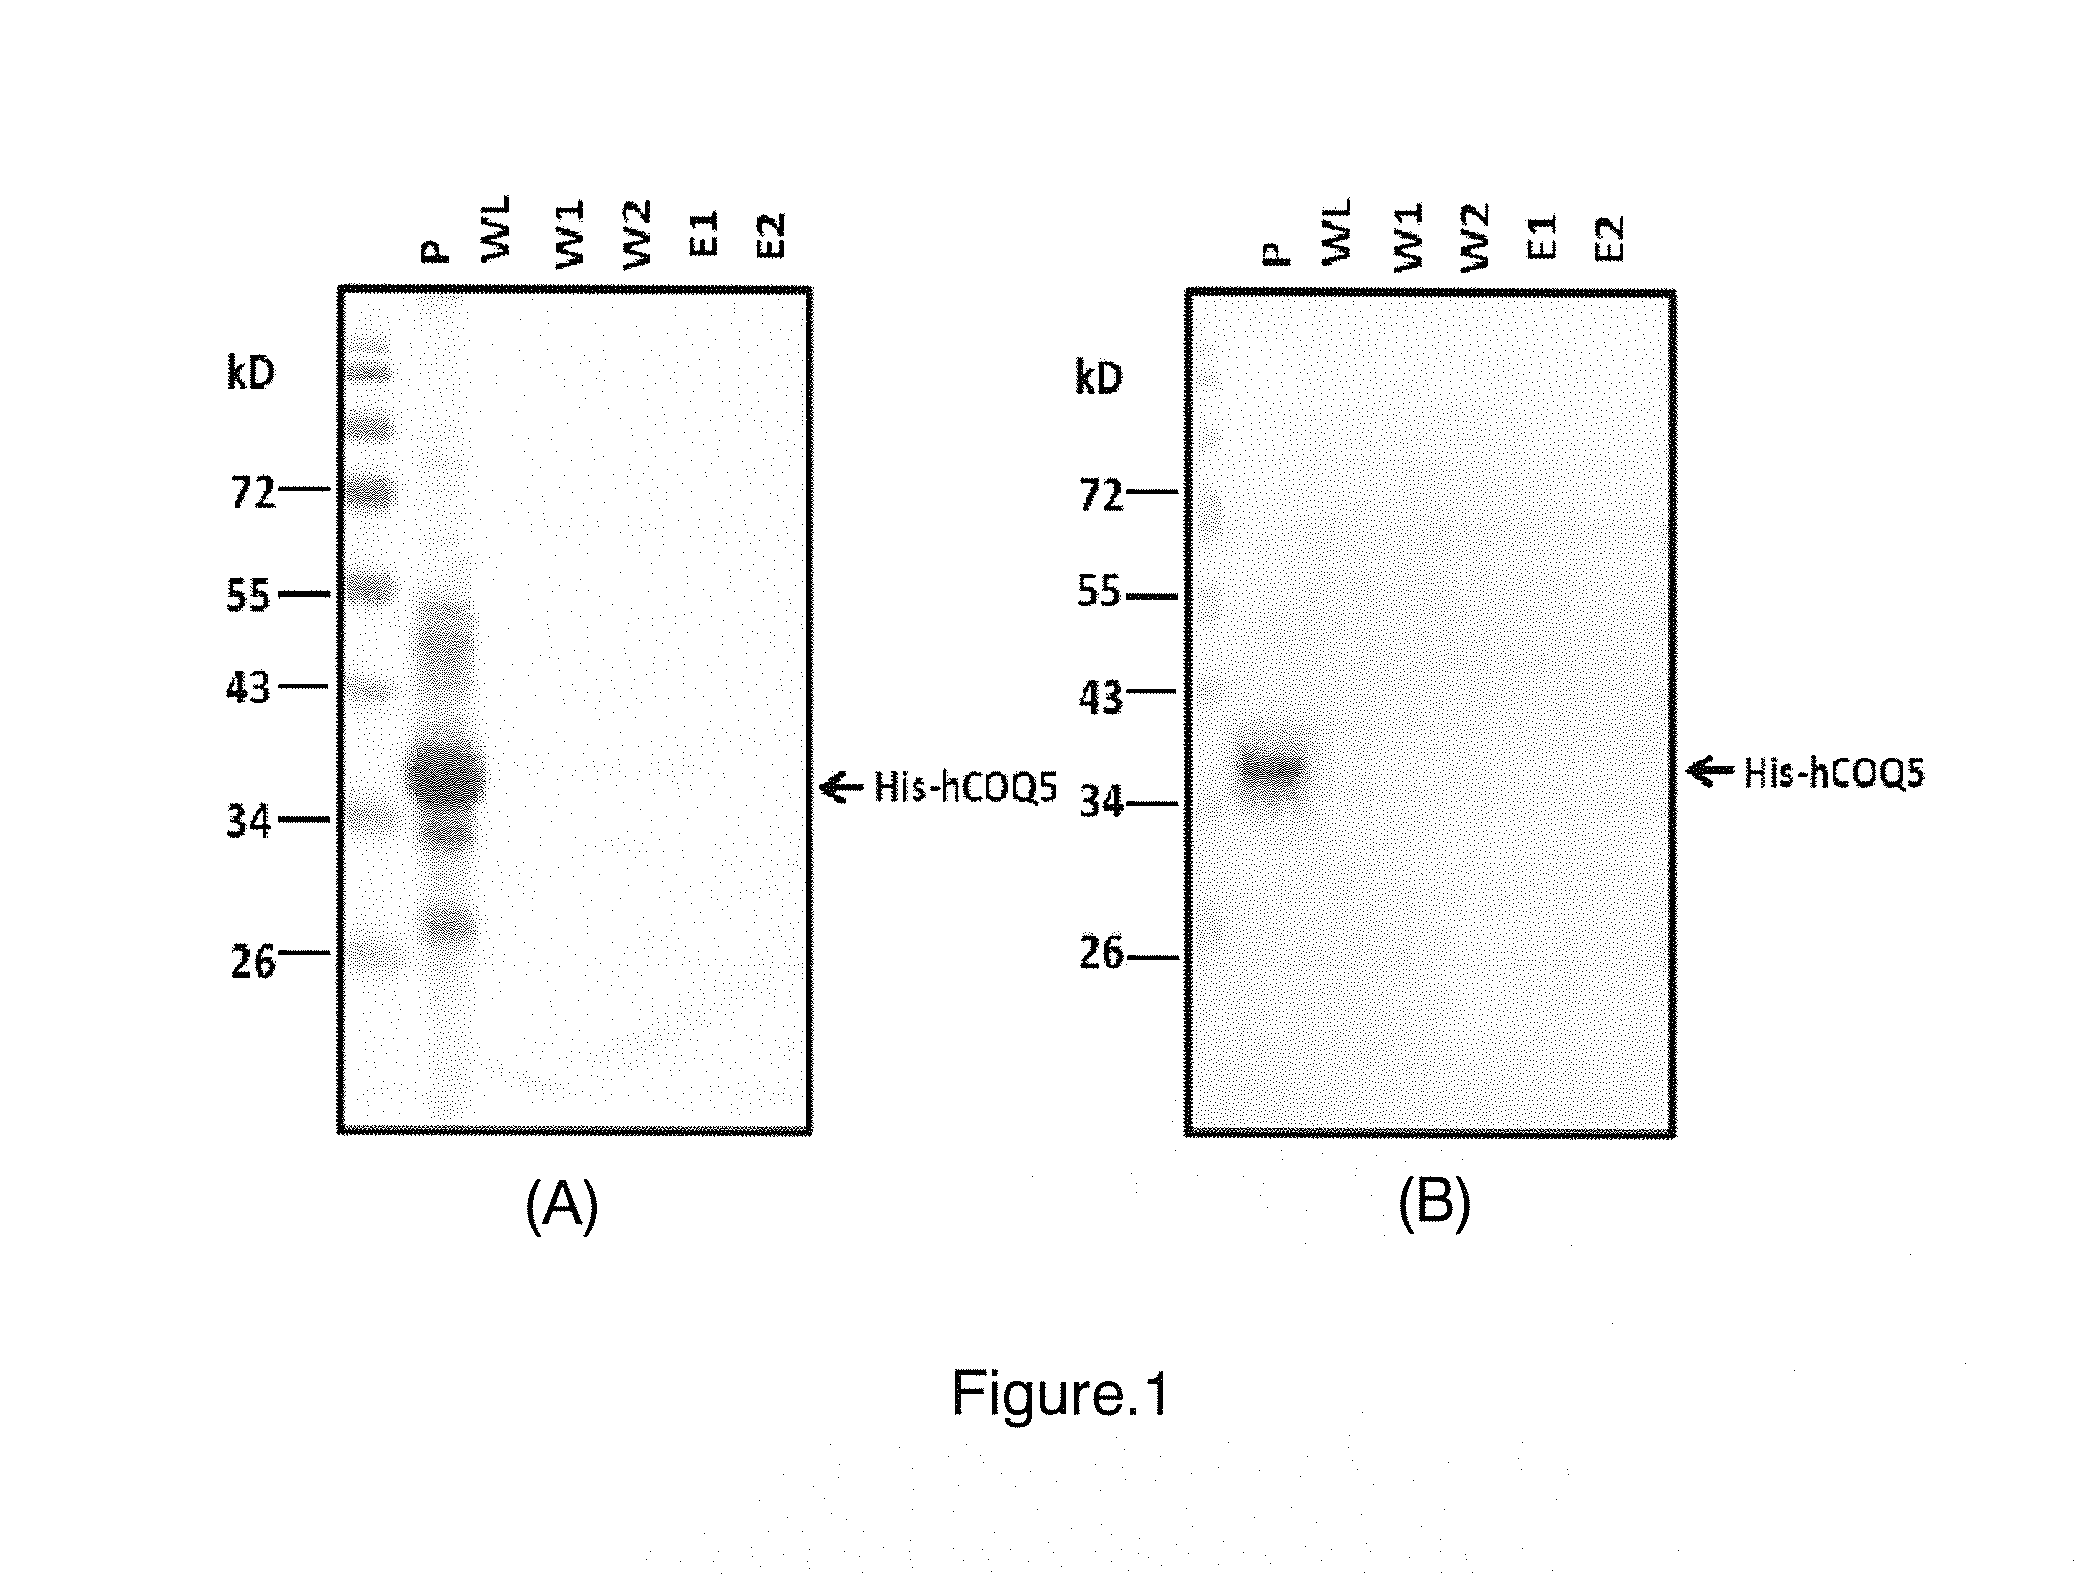 Method of producing and purifying soluble recombinant coq5 protein and soluble recombinant coq5 protein thereof